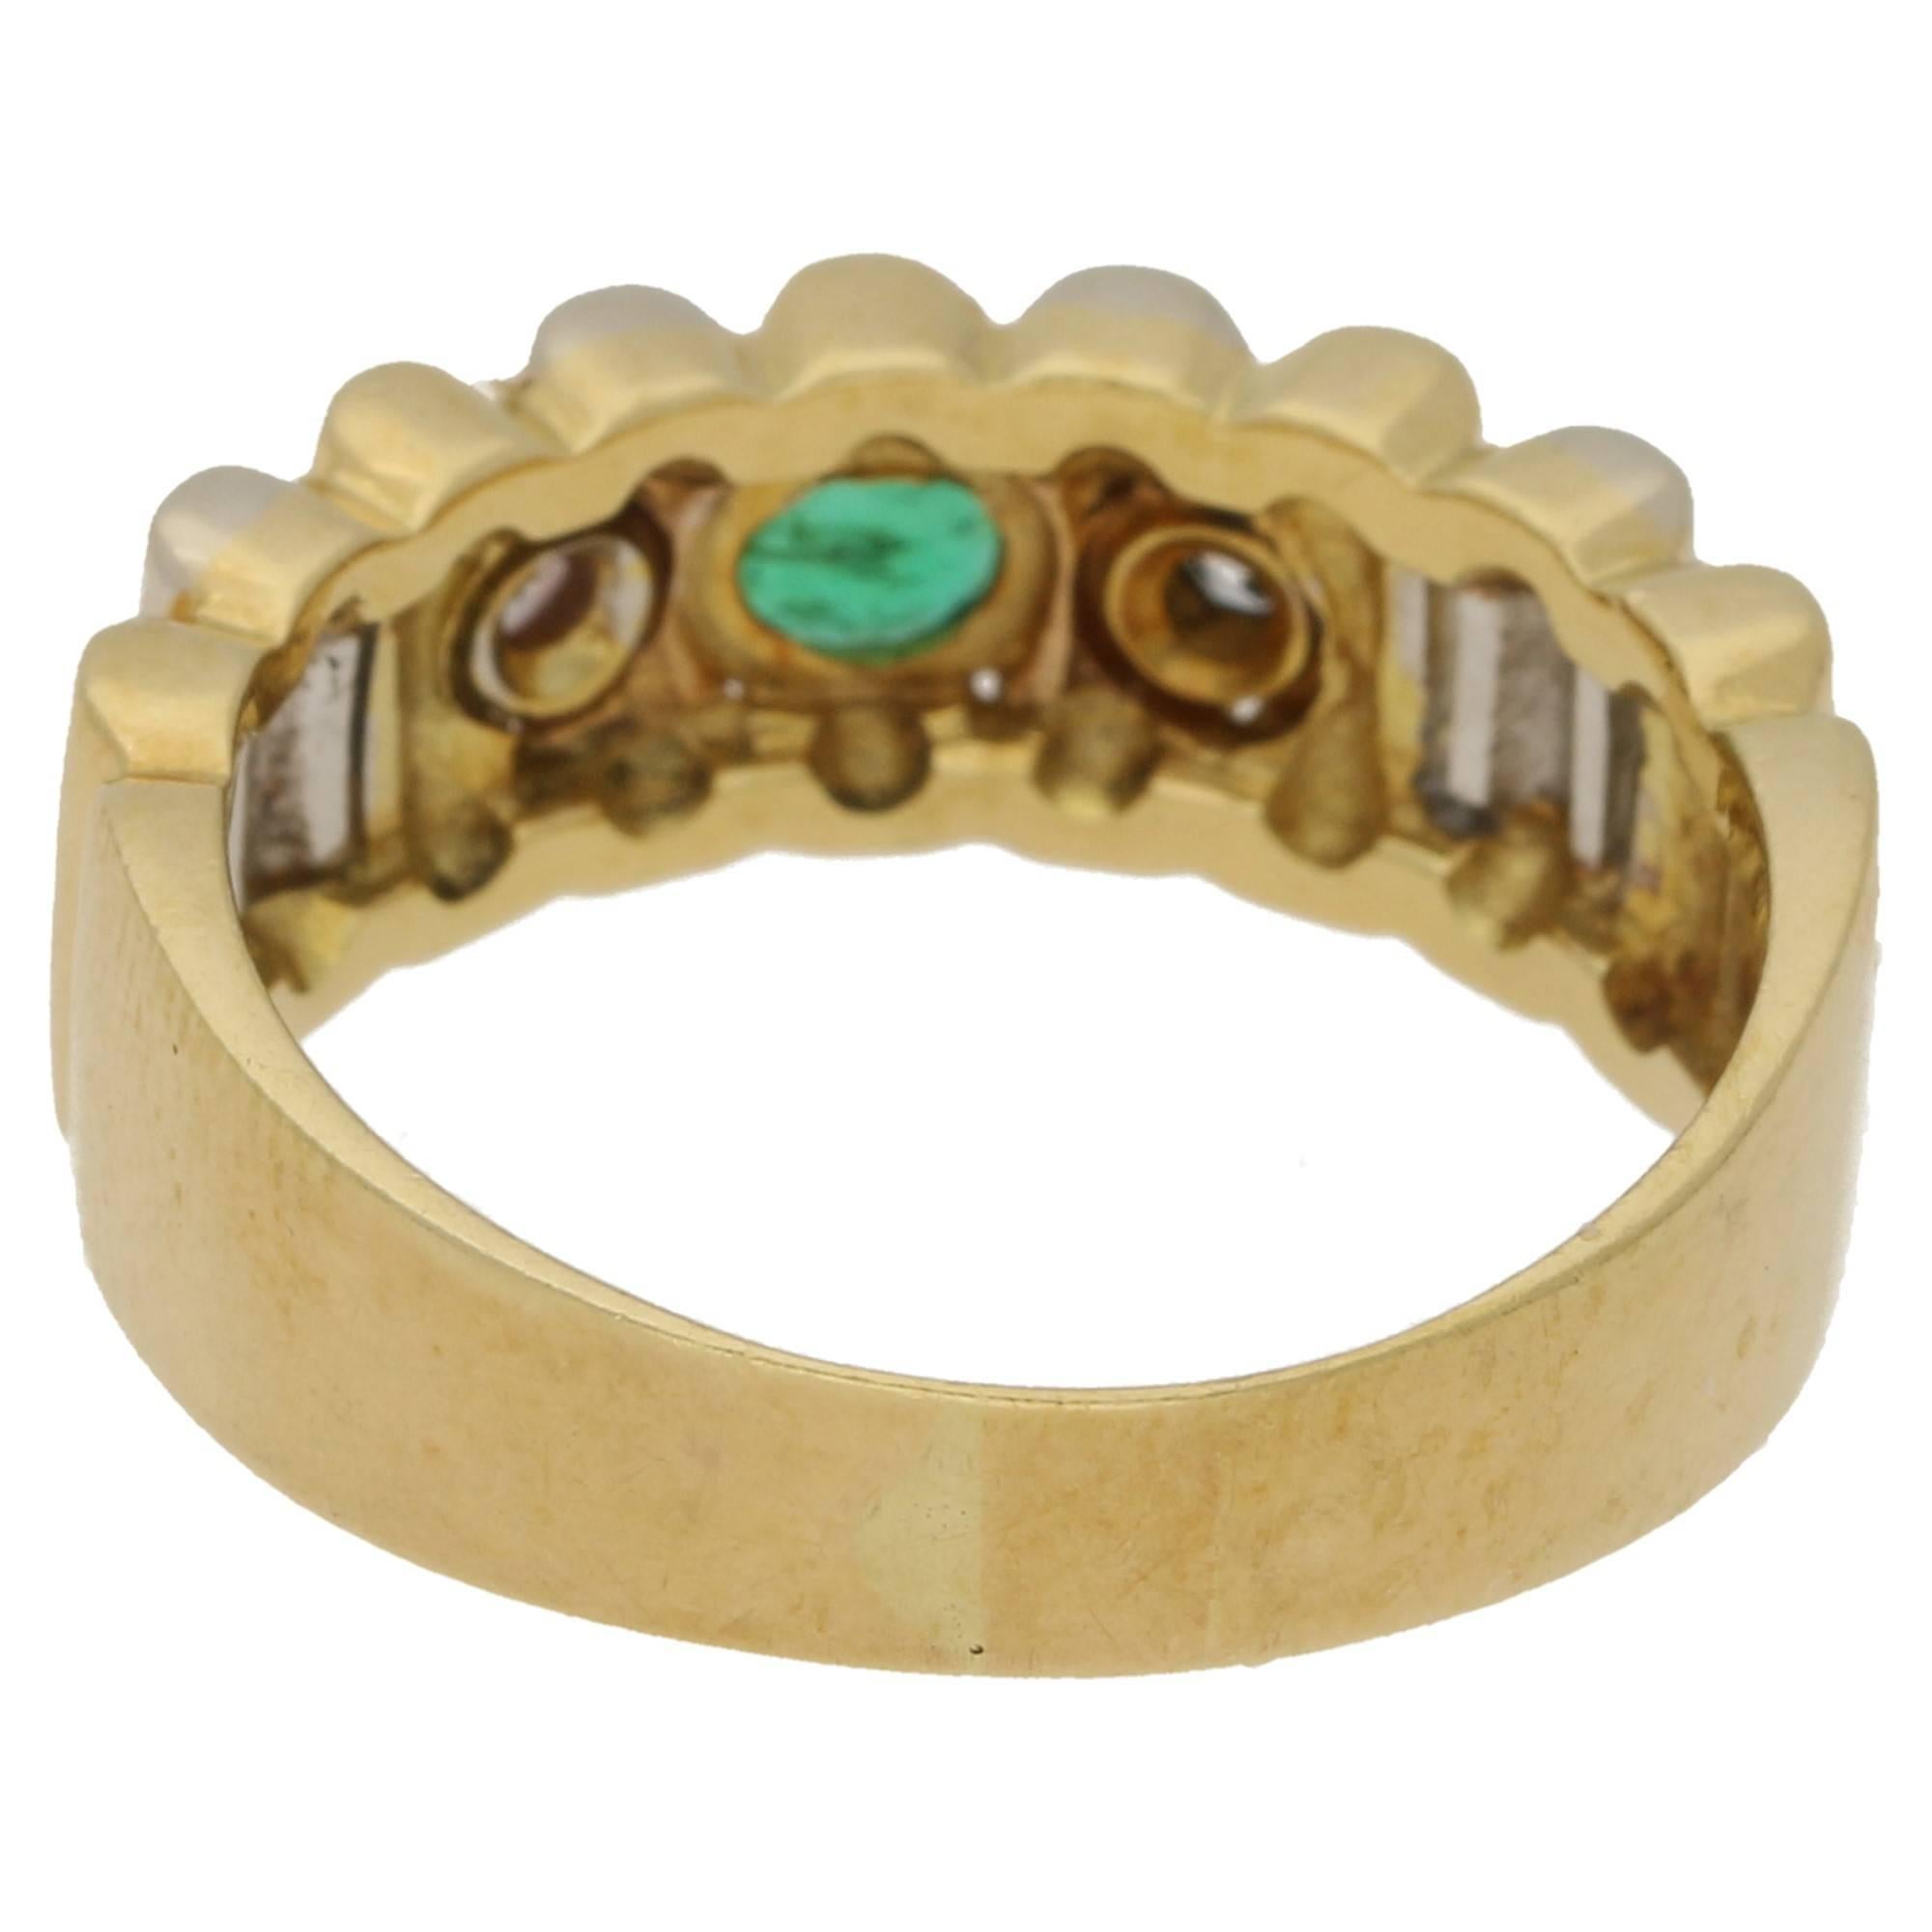 A really tactile piece, with it's undulating top face. The ring is made from 18k gold, the front face is in alternating tones of white and yellow gold. This is then set with two round brilliant diamonds and a central emerald which is a vibrant green